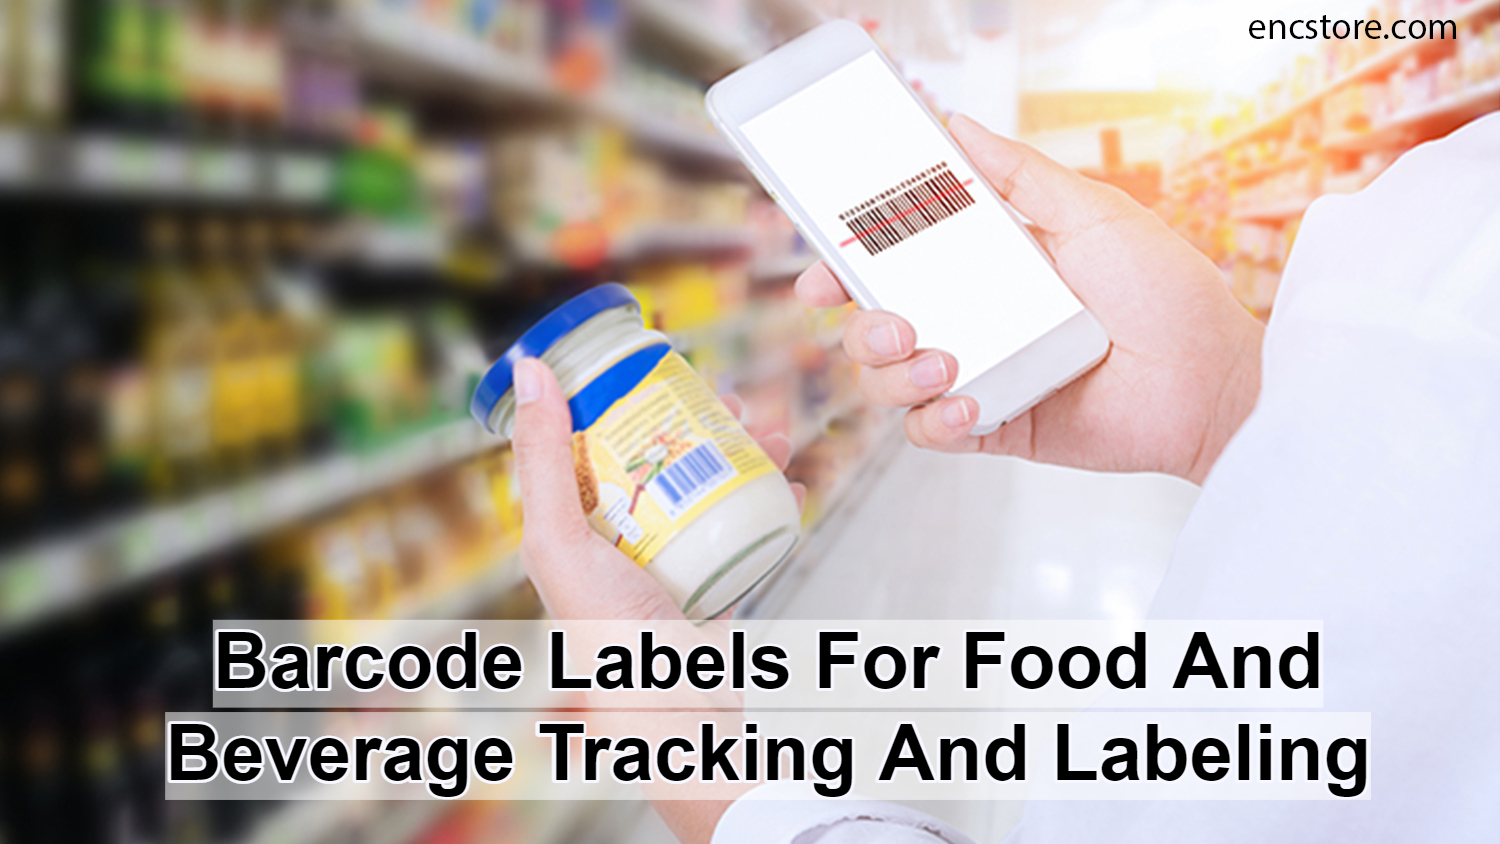 Barcode Labels For Food And Beverage Tracking And Labeling